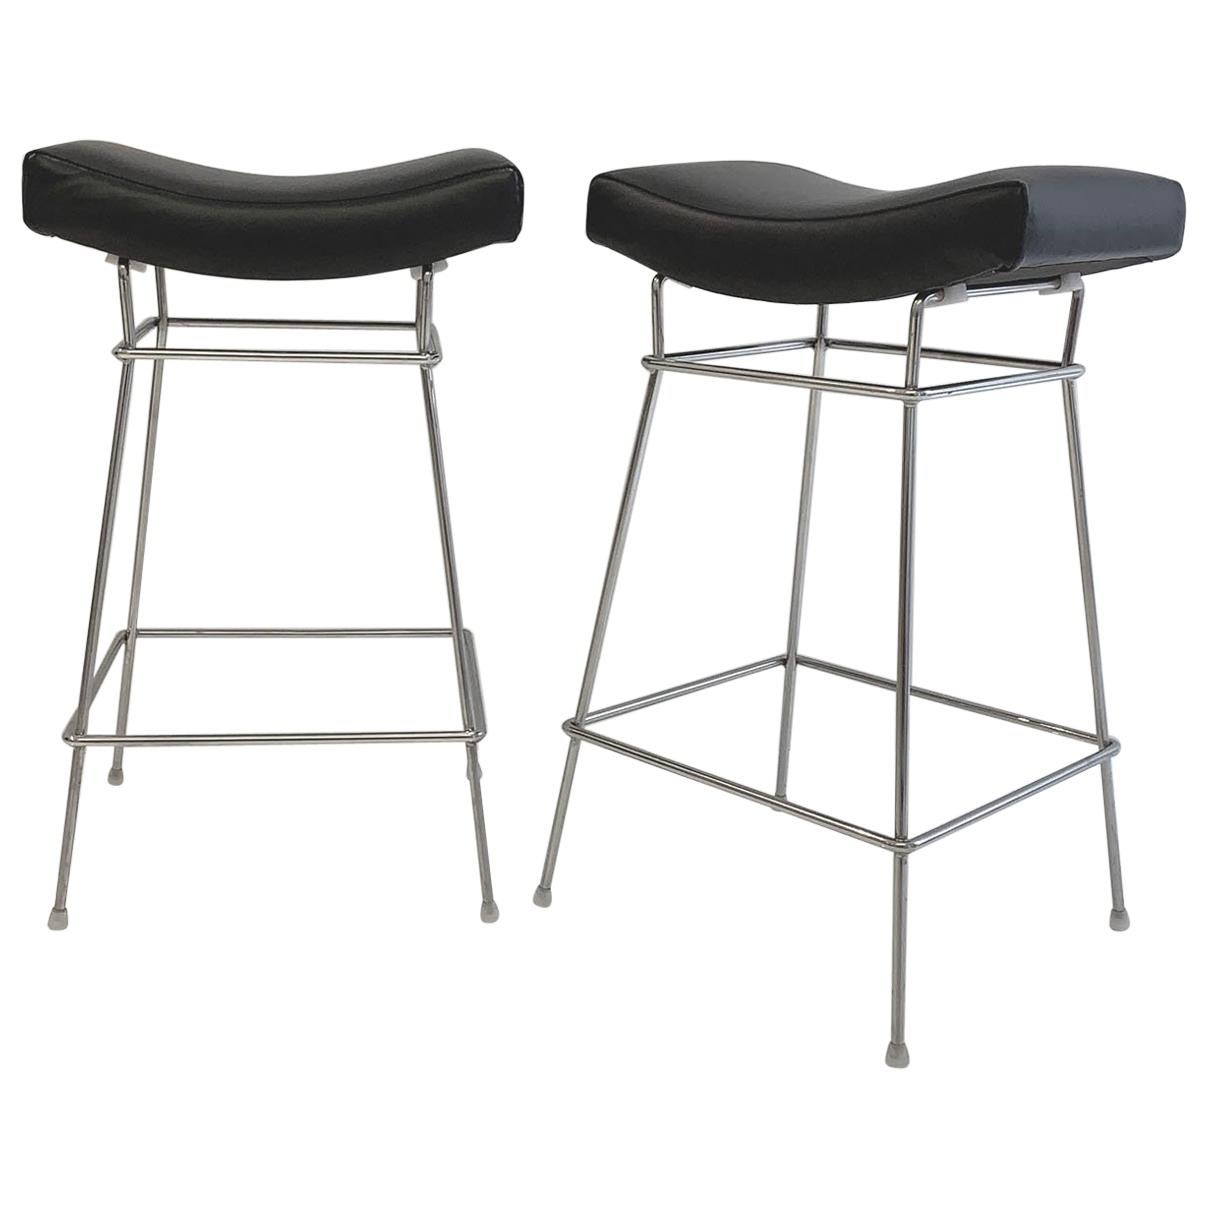 Vintage Bienal Stools with Chromed Steel Bases and Black Leather Seats